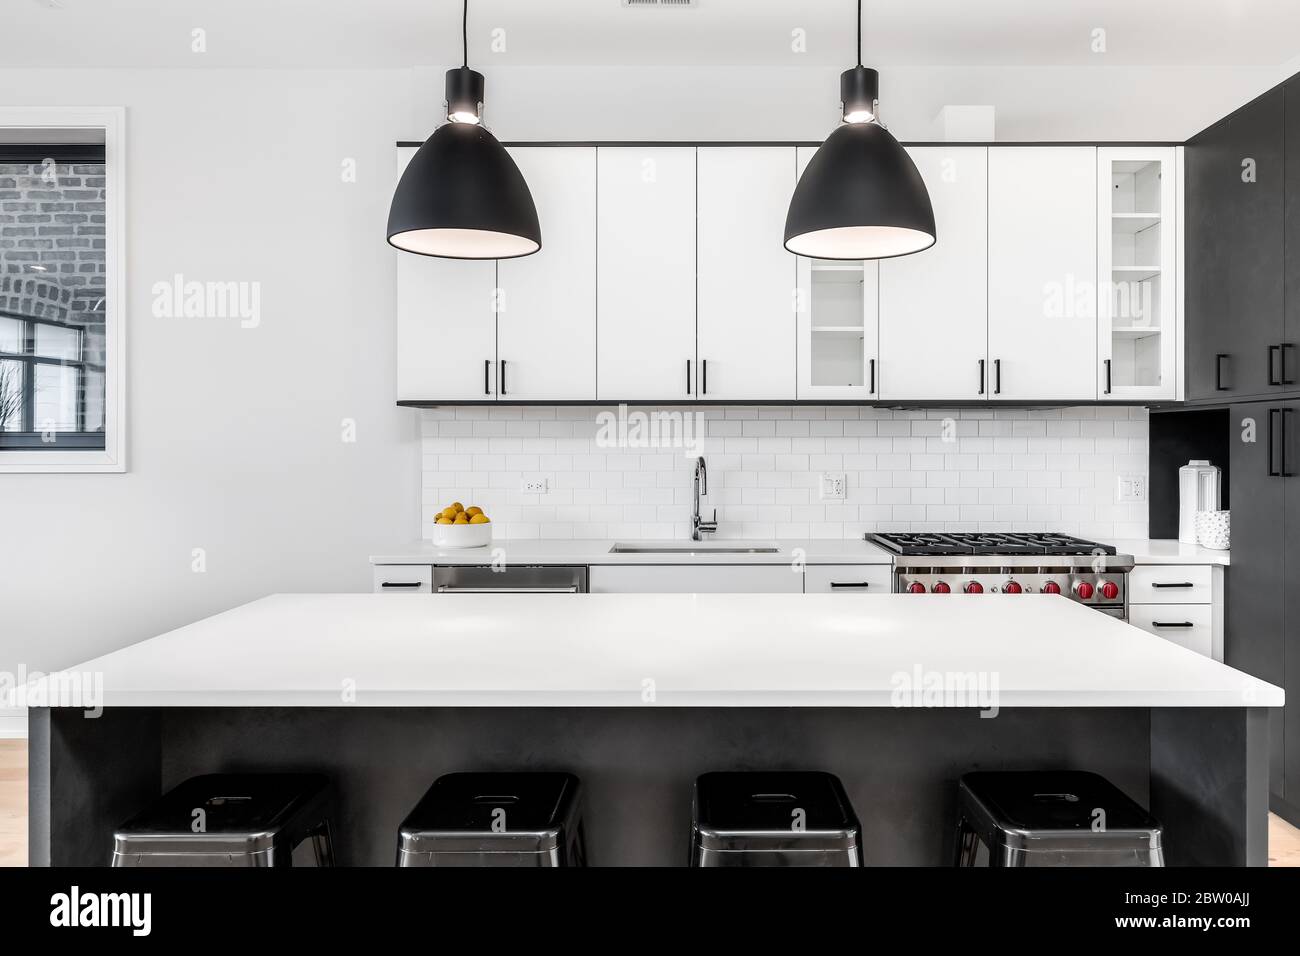 A modern kitchen with black and white cabinets, stainless steel Wolf and Sub-Zero appliances, and bar stools sitting at the white granite counter top. Stock Photo